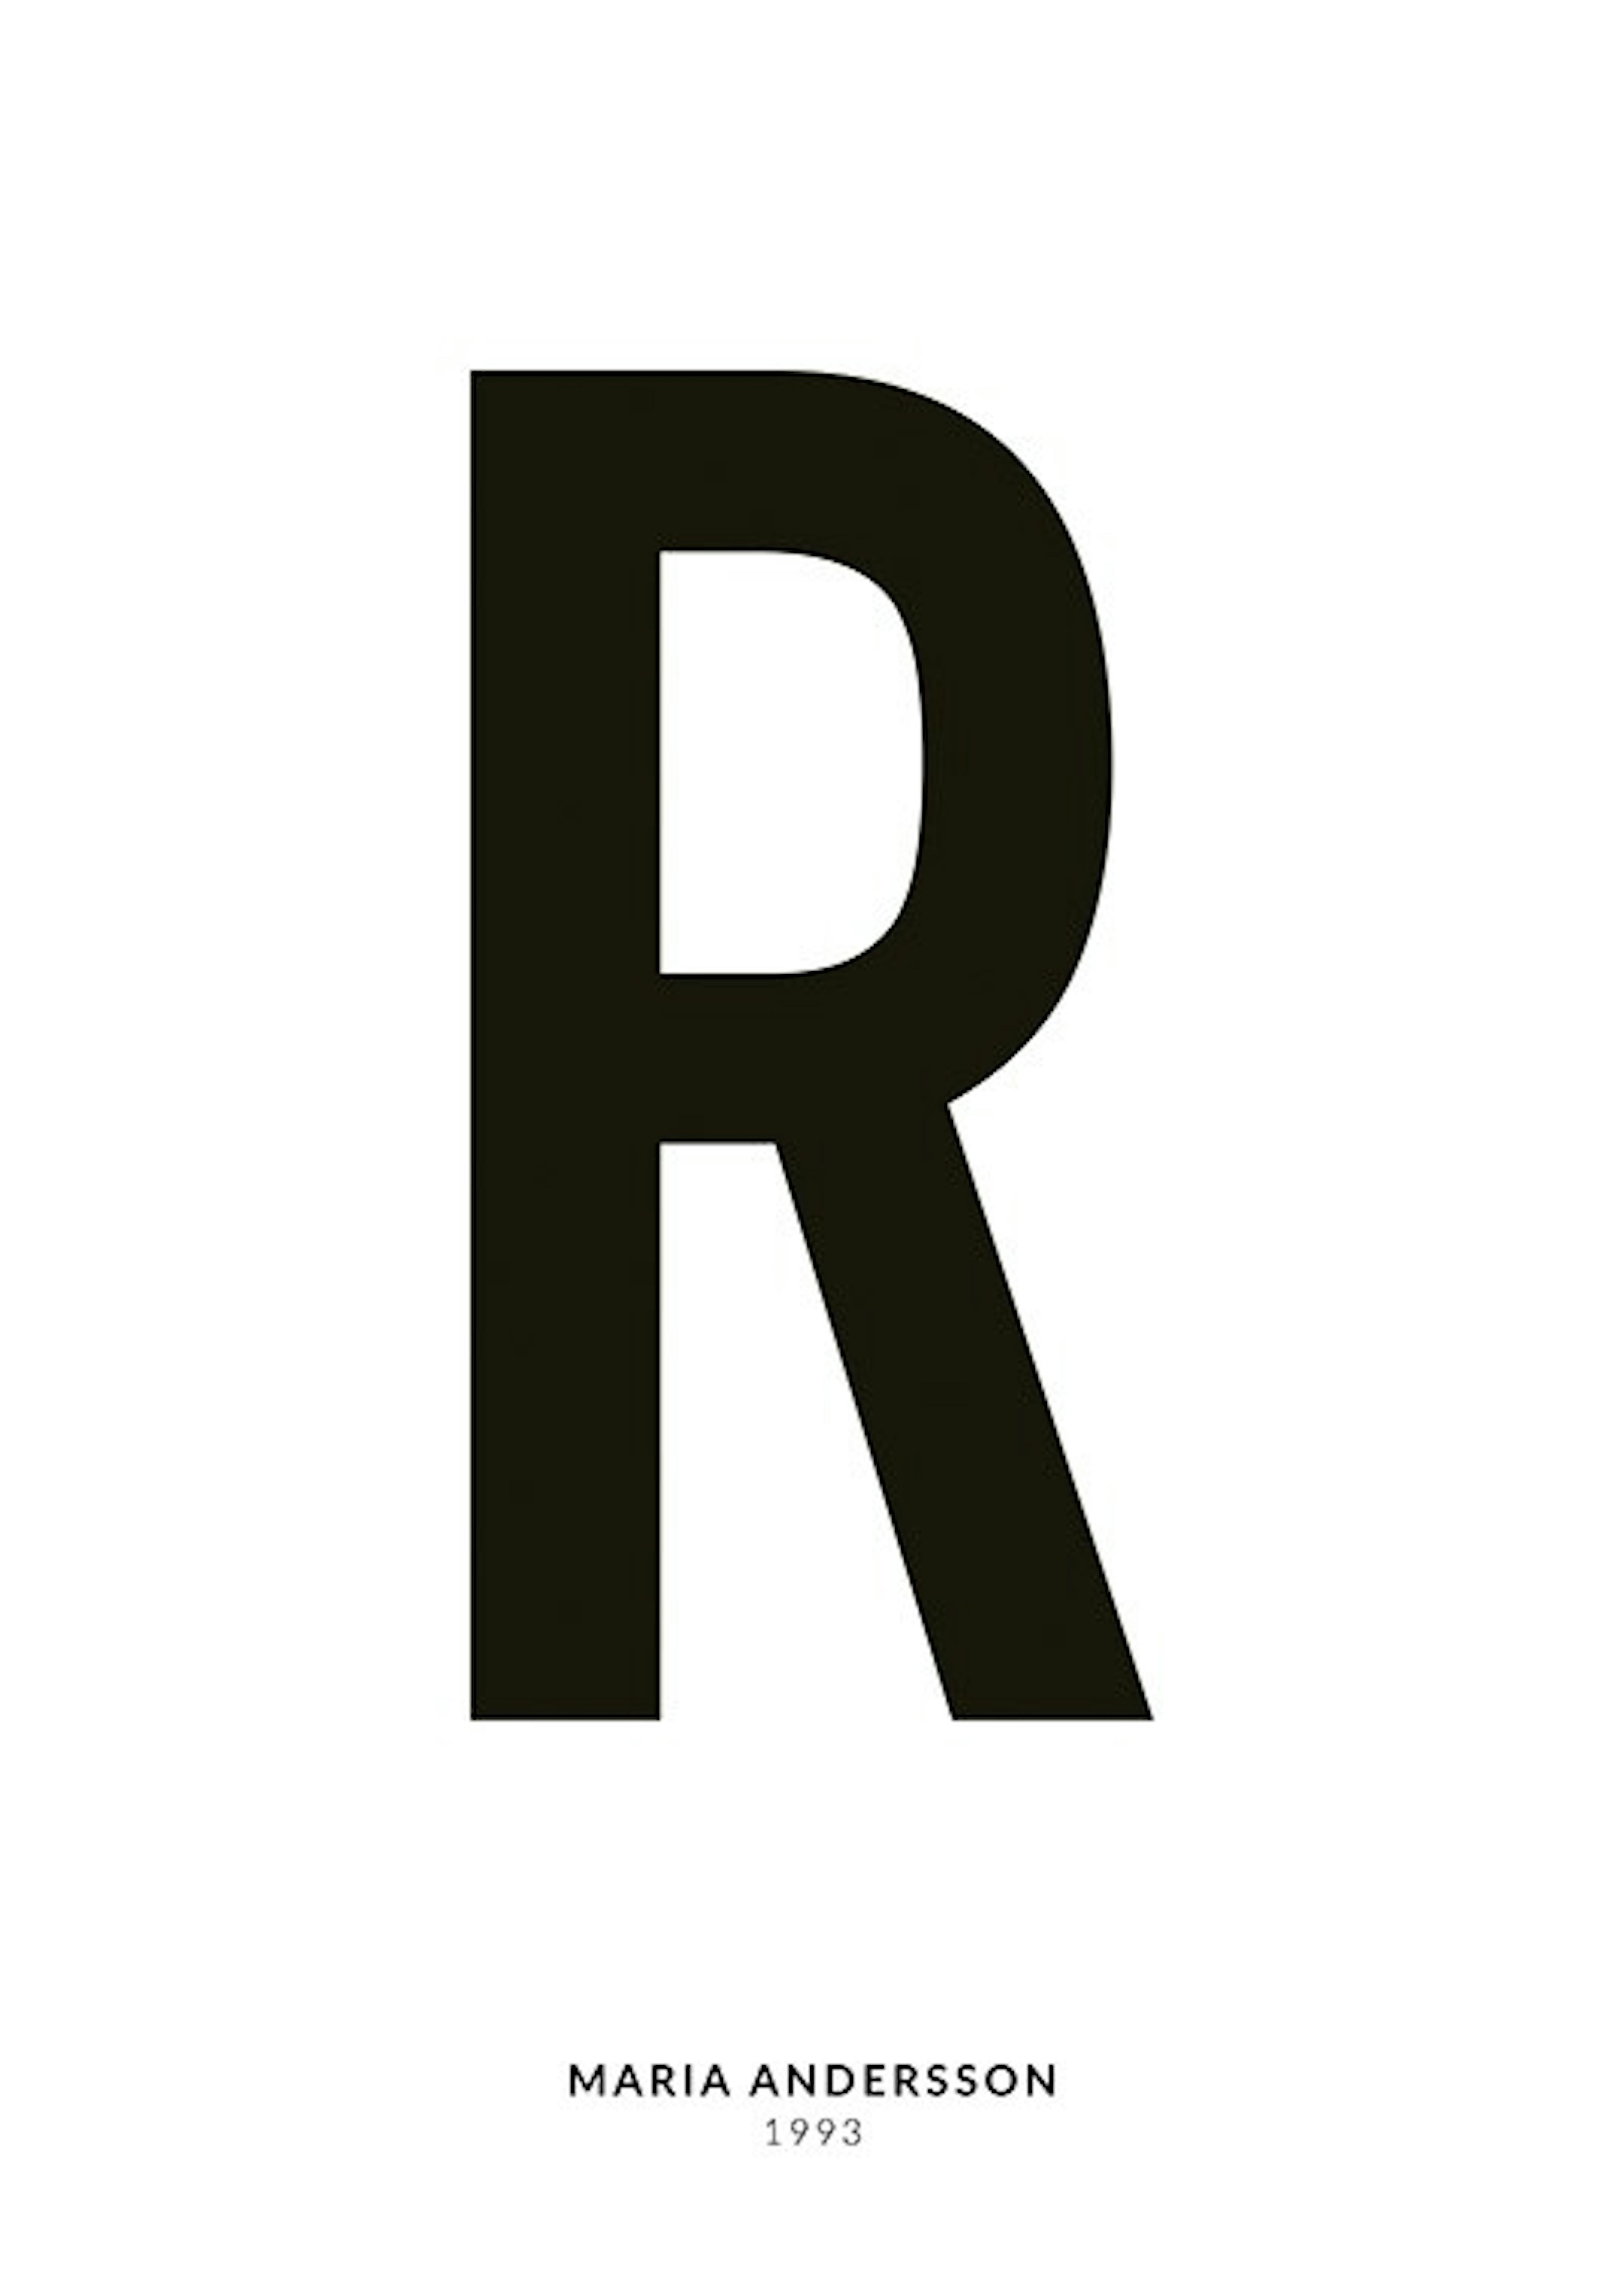 My Letter R Personal 0